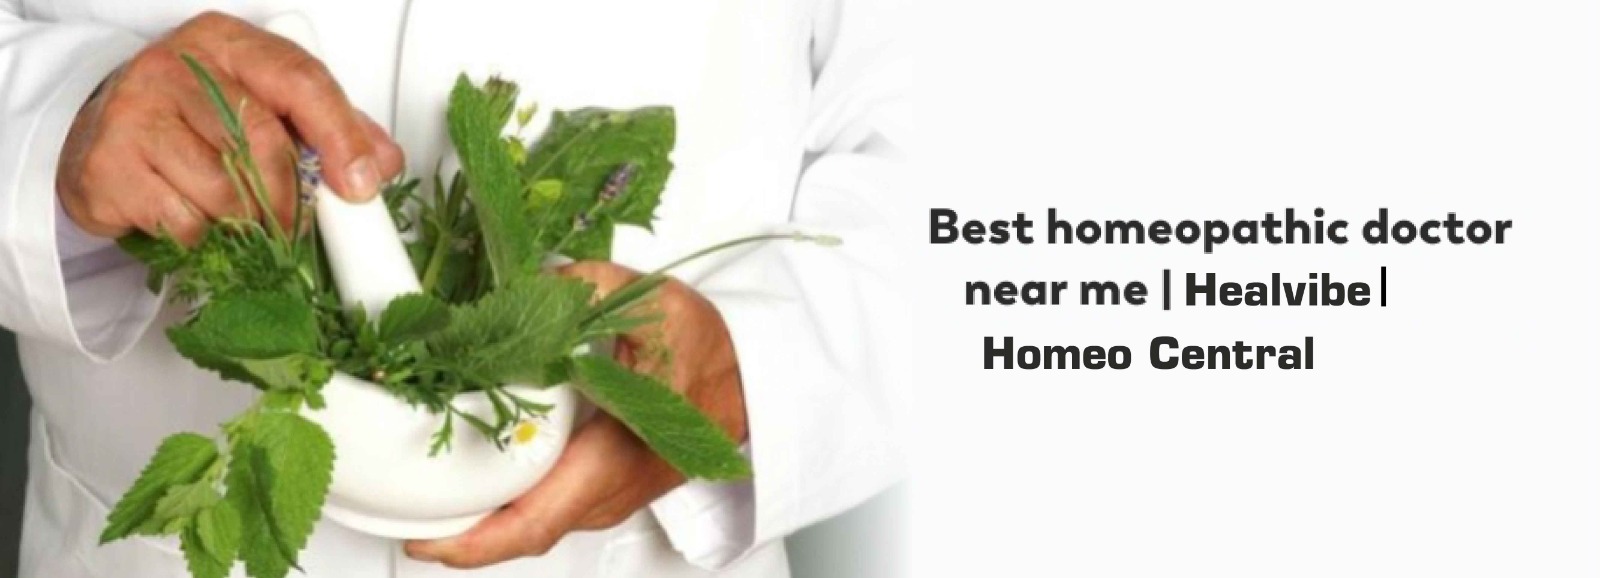 Best homeopathic doctor near me